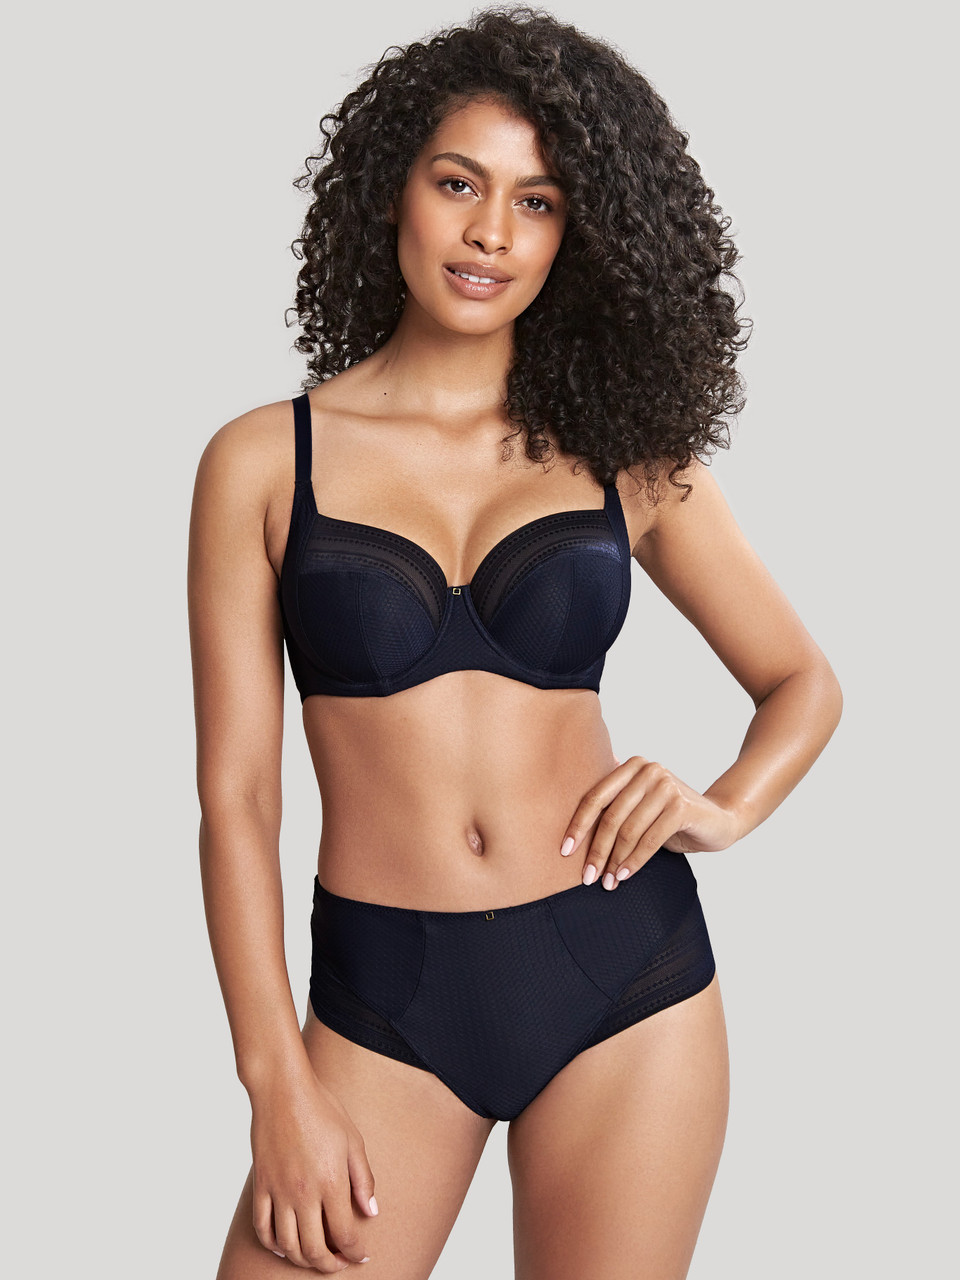 Avon - 'Tis the season of love, so look your stylish best with the Maxine  Underwire Convertible Seamless Bra and Maxine Seamless Hipster Panty. Wear  it with the dress of your choice